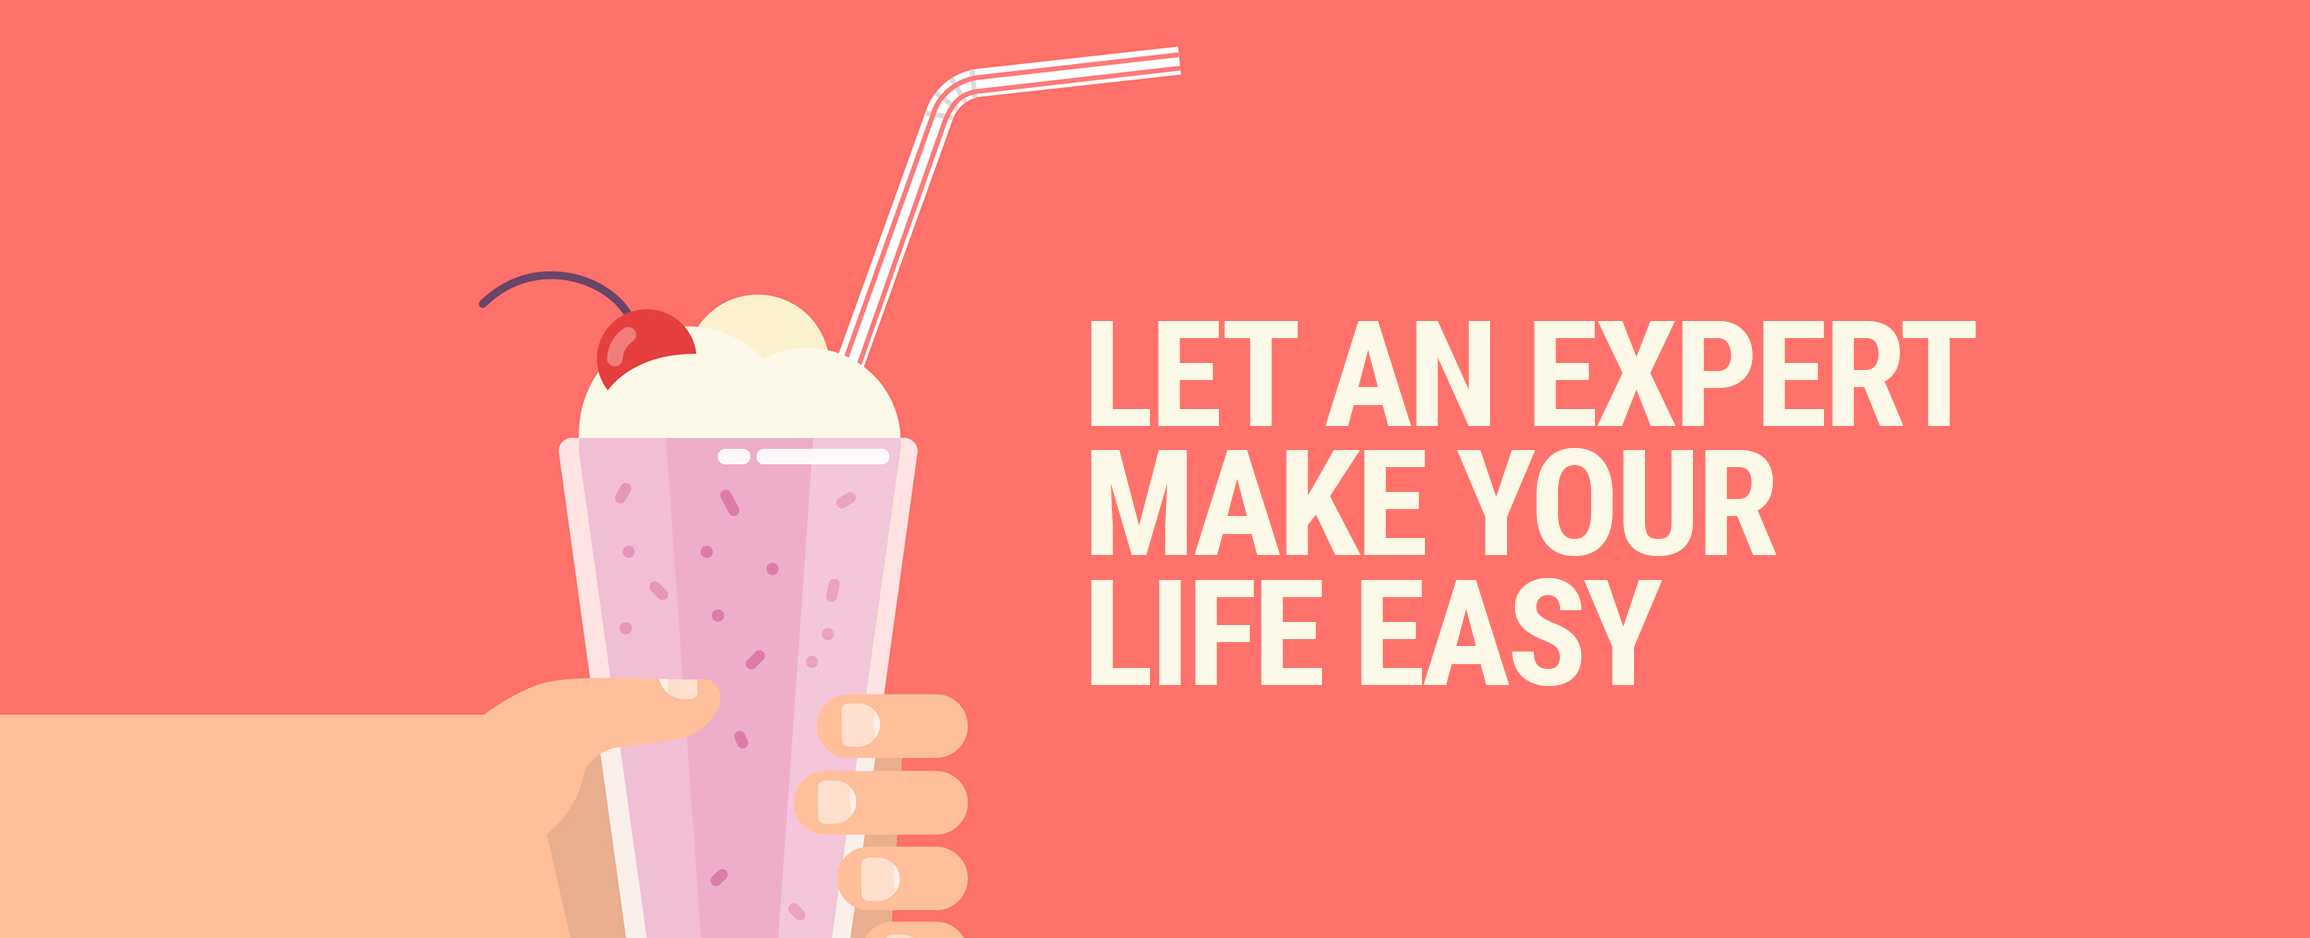 Let an expert make your life easy